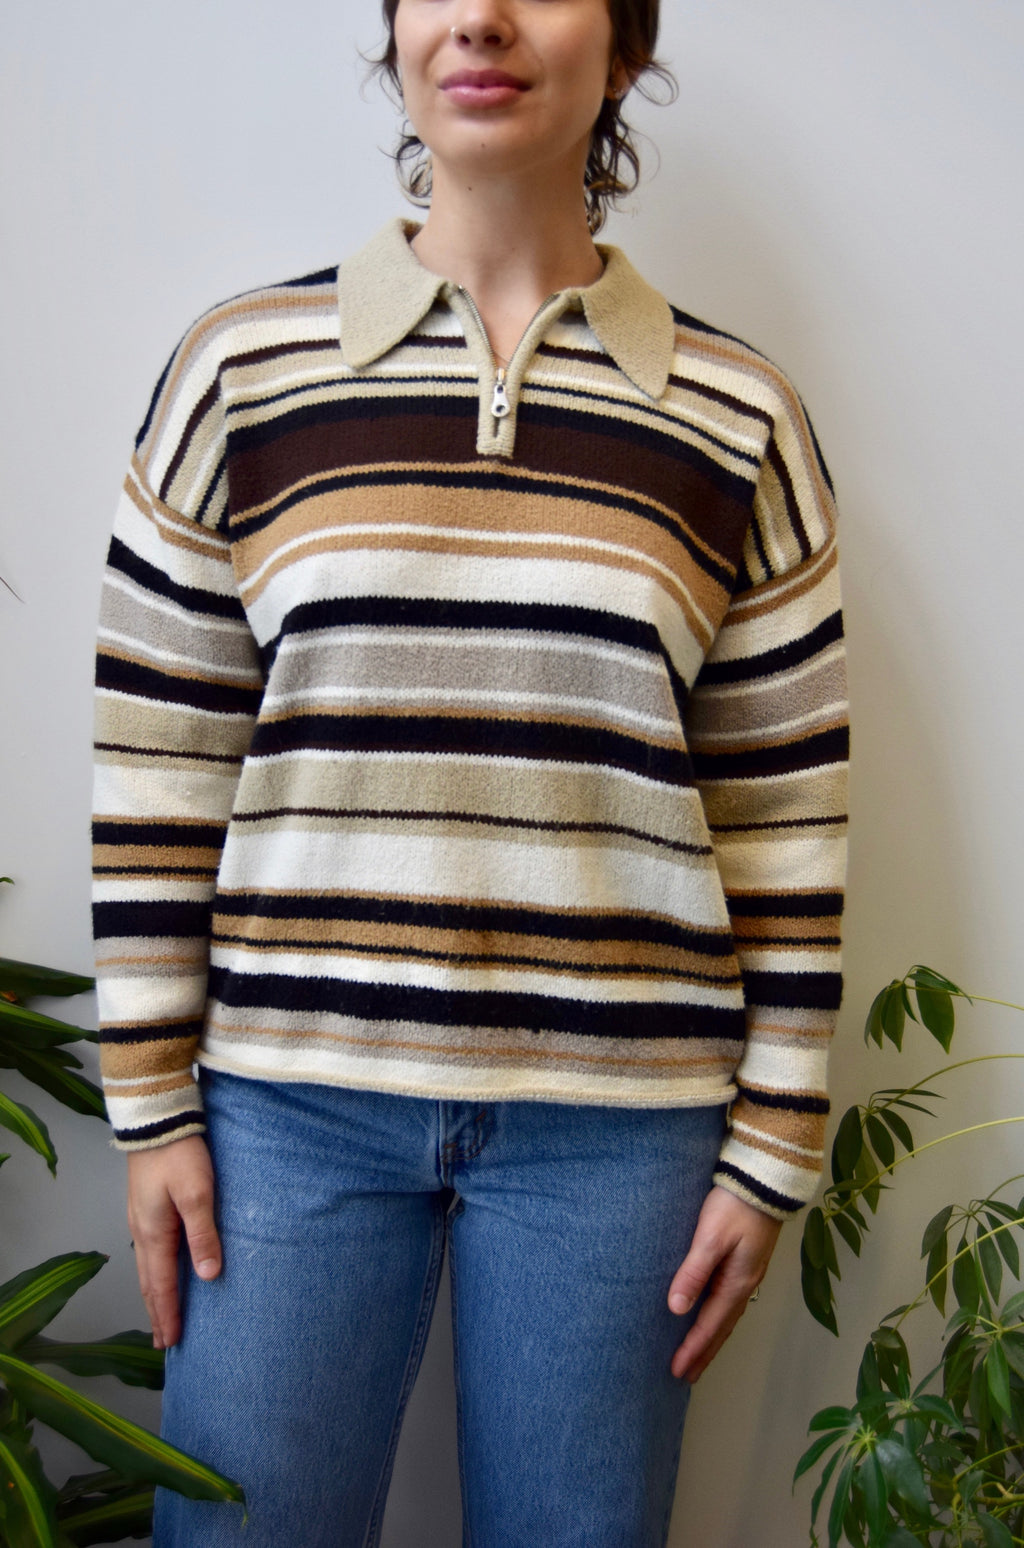 00's Striped Polo Sweater